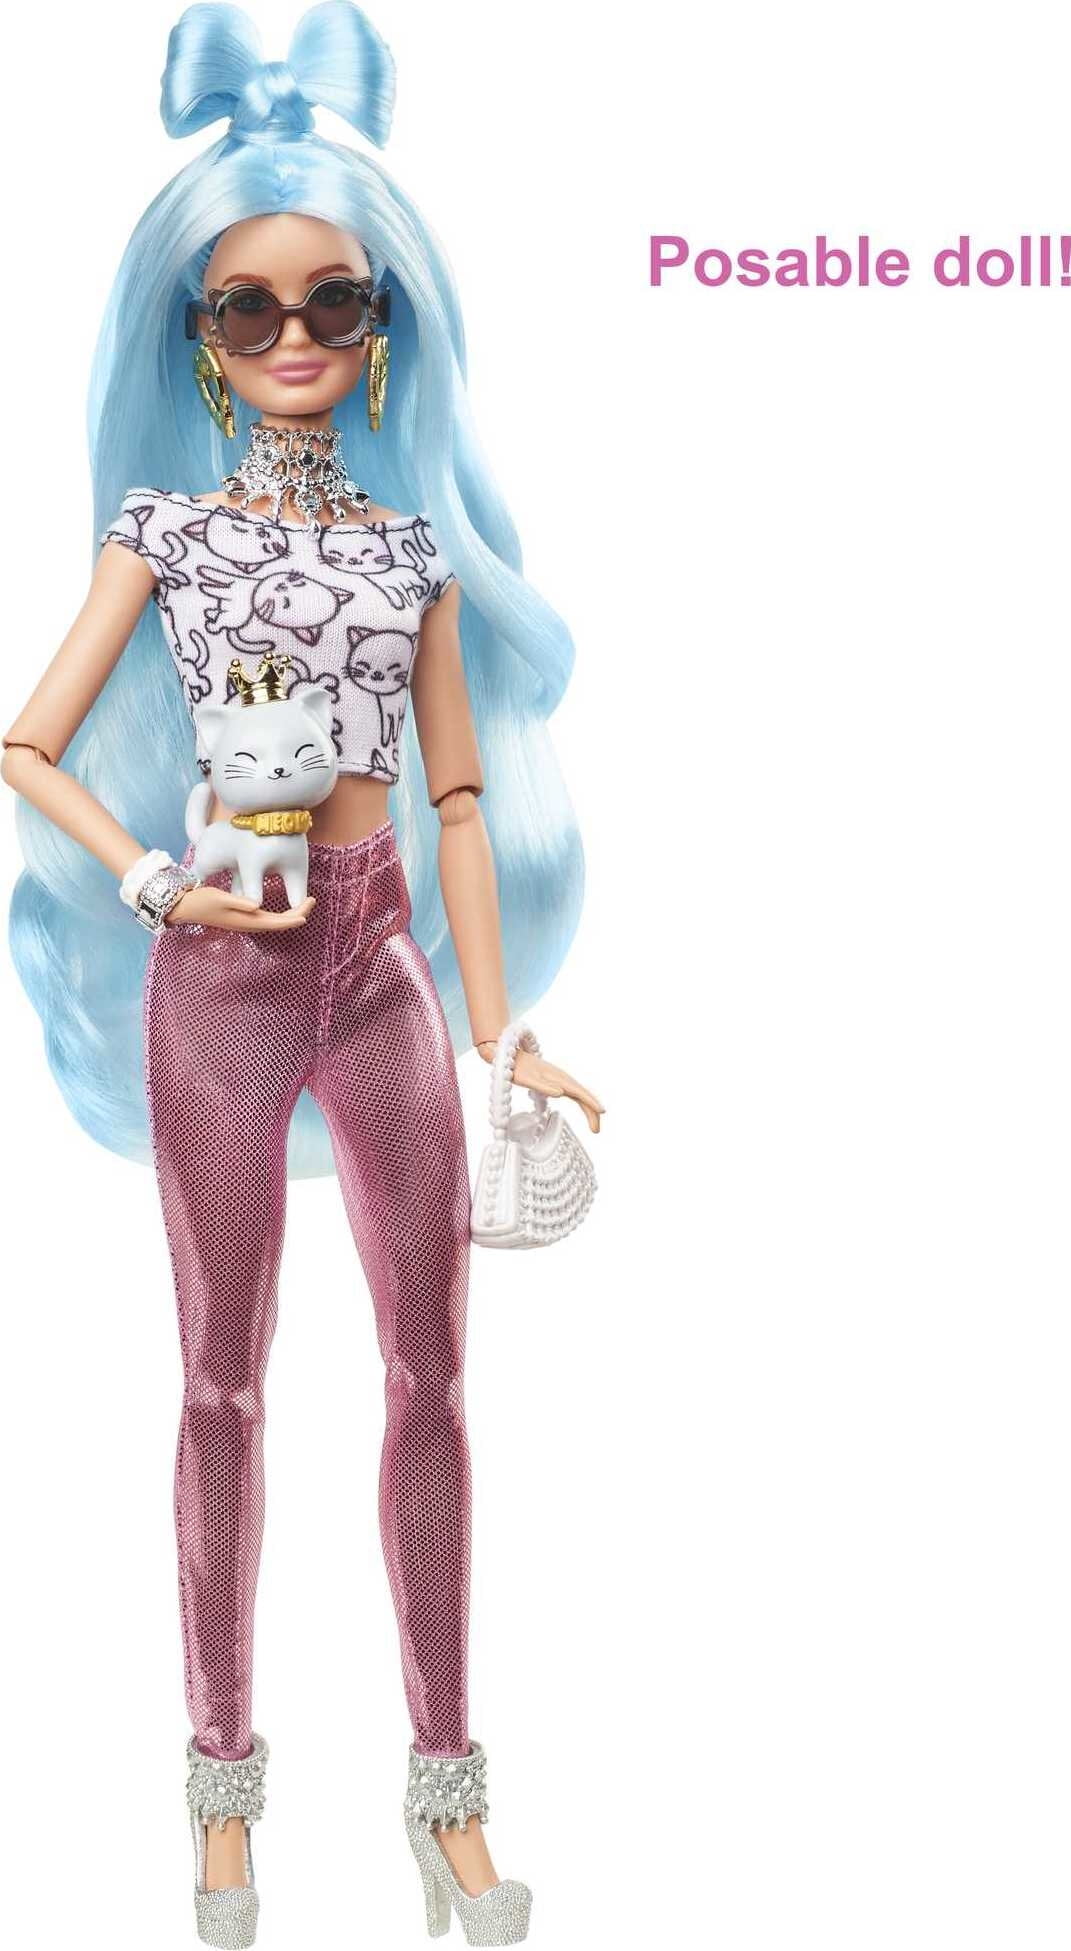 Barbie Extra Fashion Doll & Accessories Set with Mix-and-Match for 30+ Looks - Walmart.com